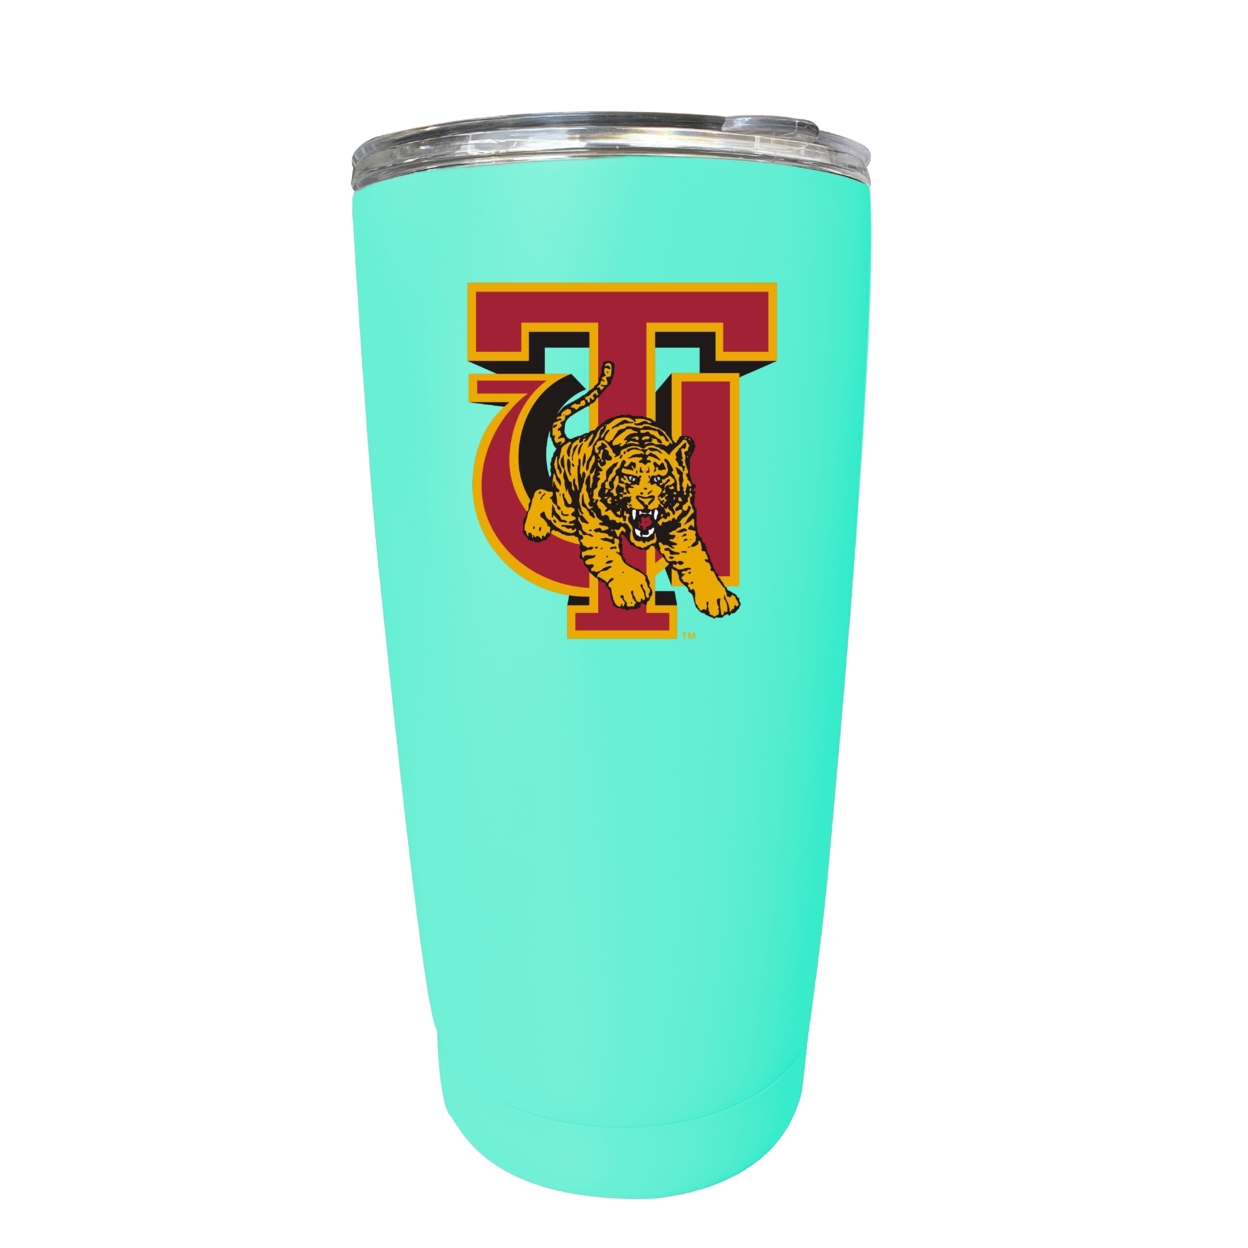 Tuskegee University 16 Oz Insulated Stainless Steel Tumbler - Choose Your Color. - Seafoam